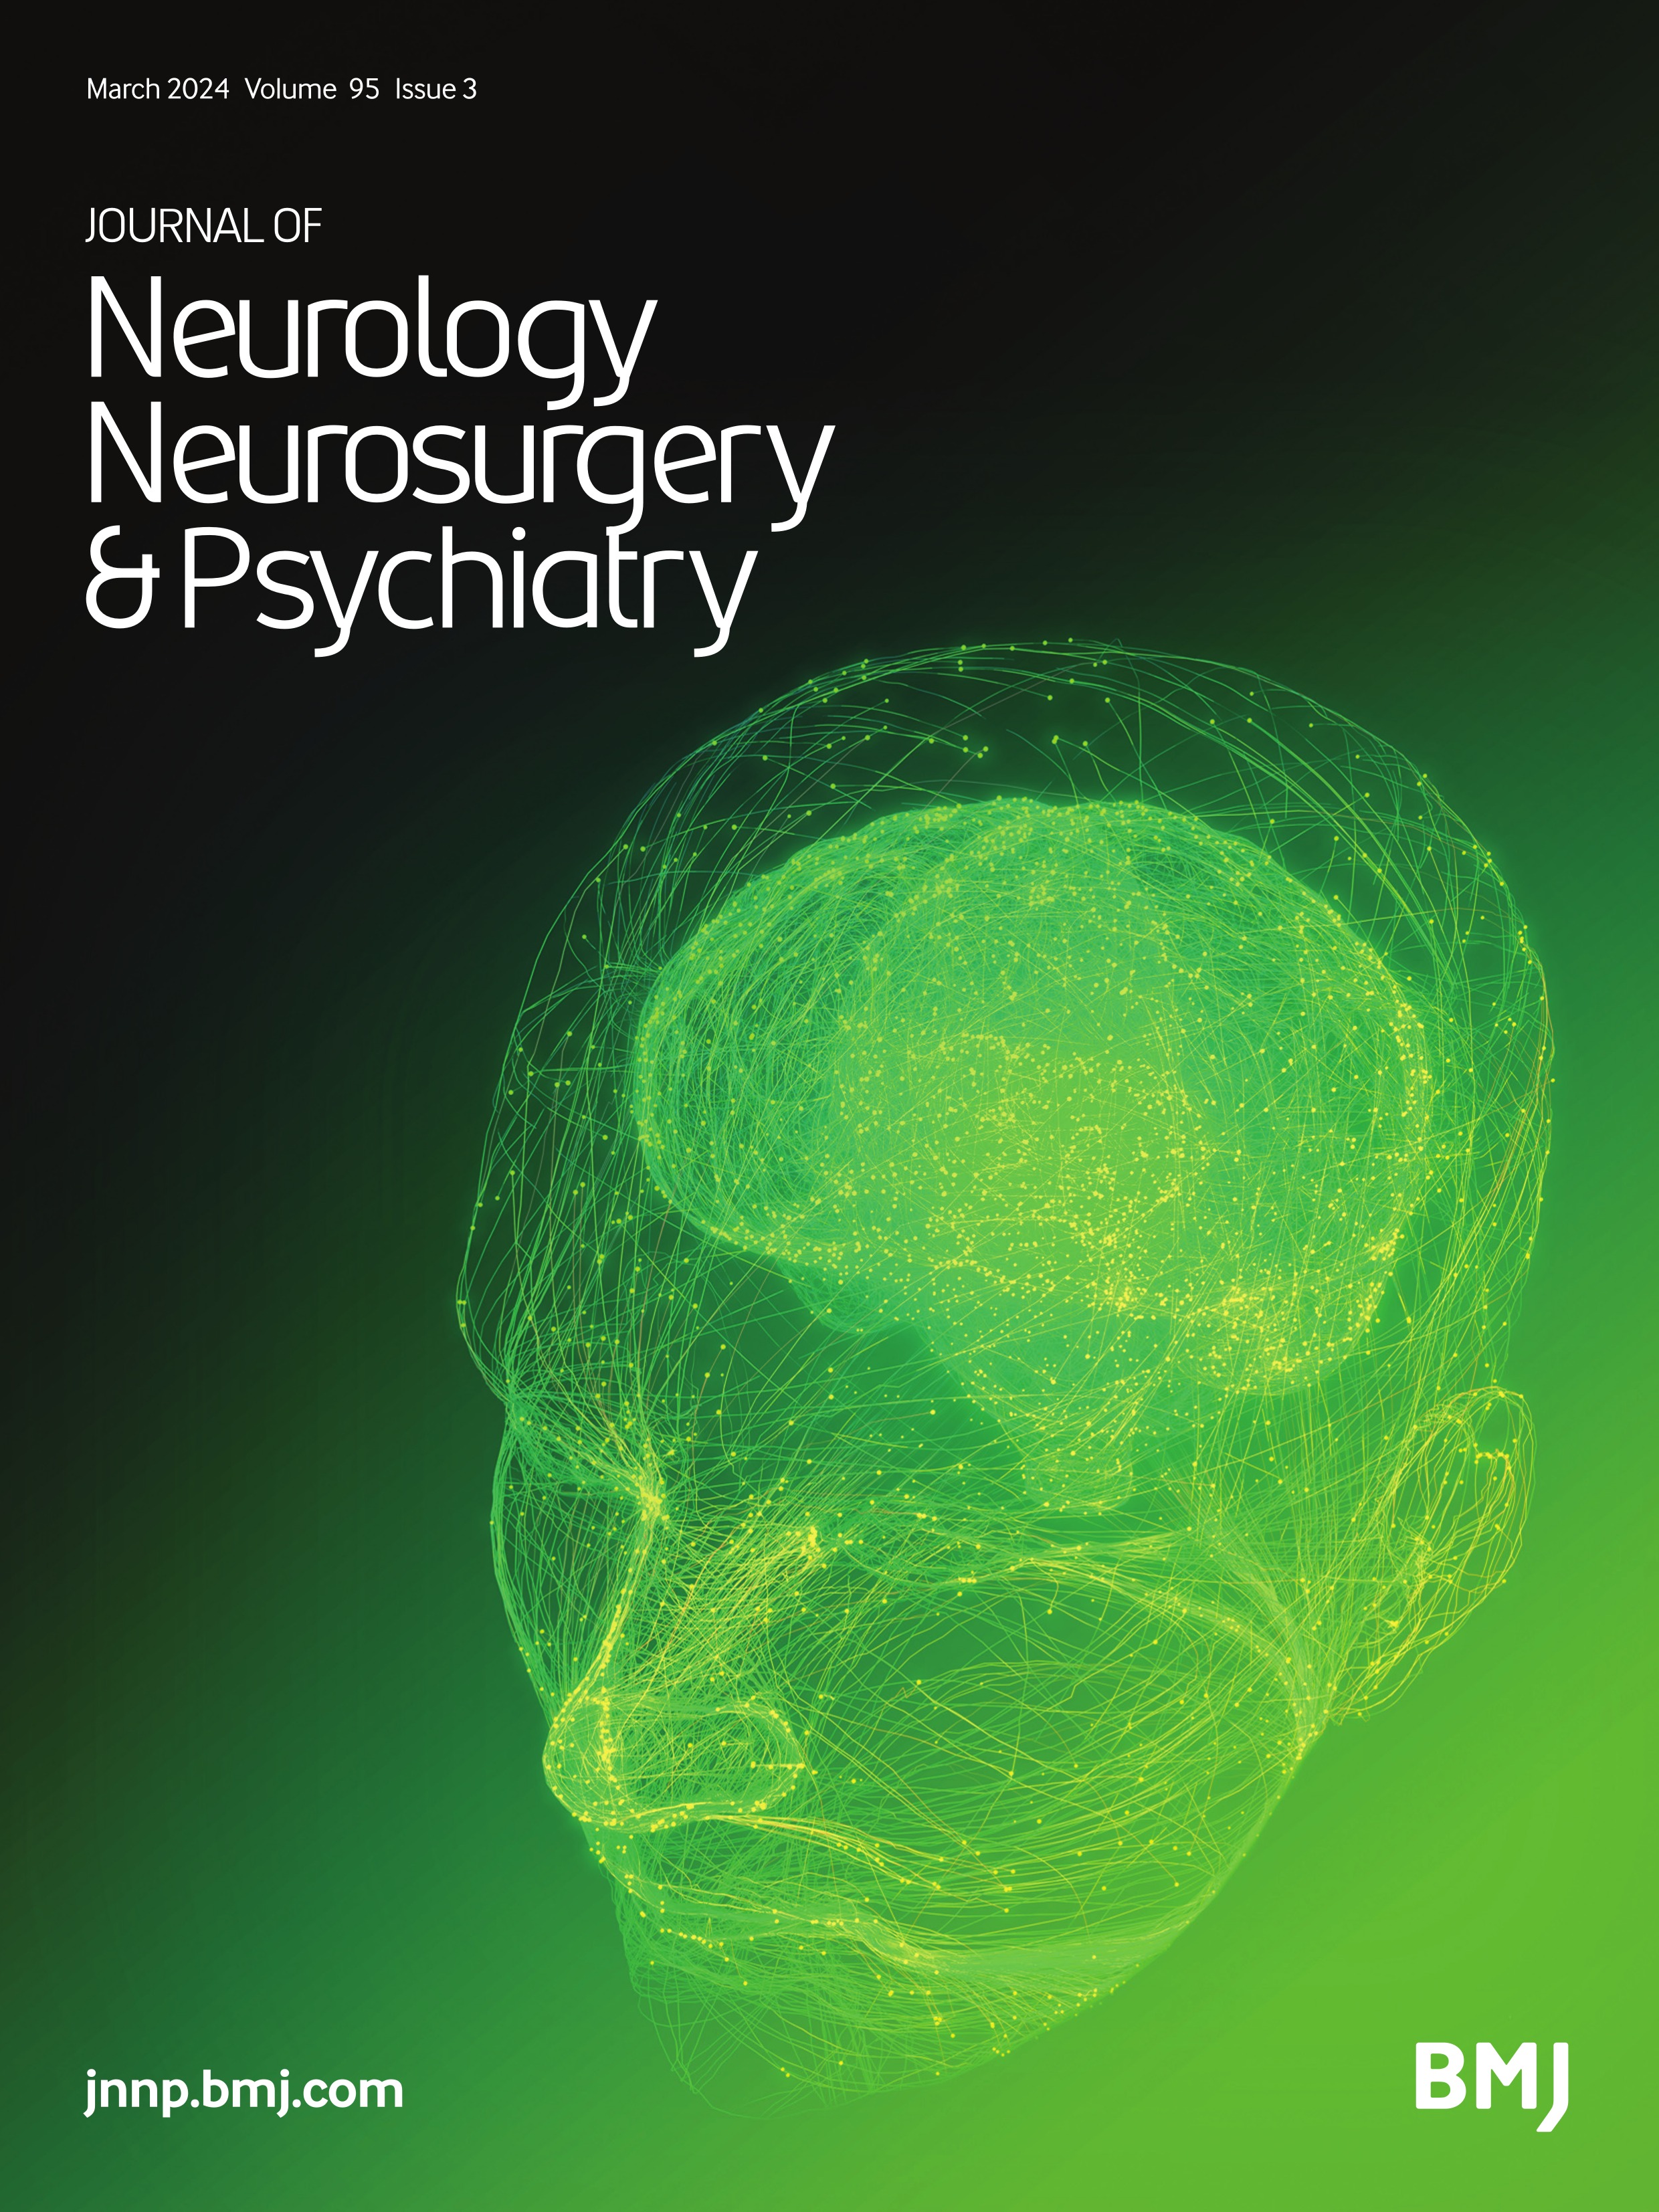 Cognitive and executive impairments in Parkinsons disease psychosis: a Bayesian meta-analysis